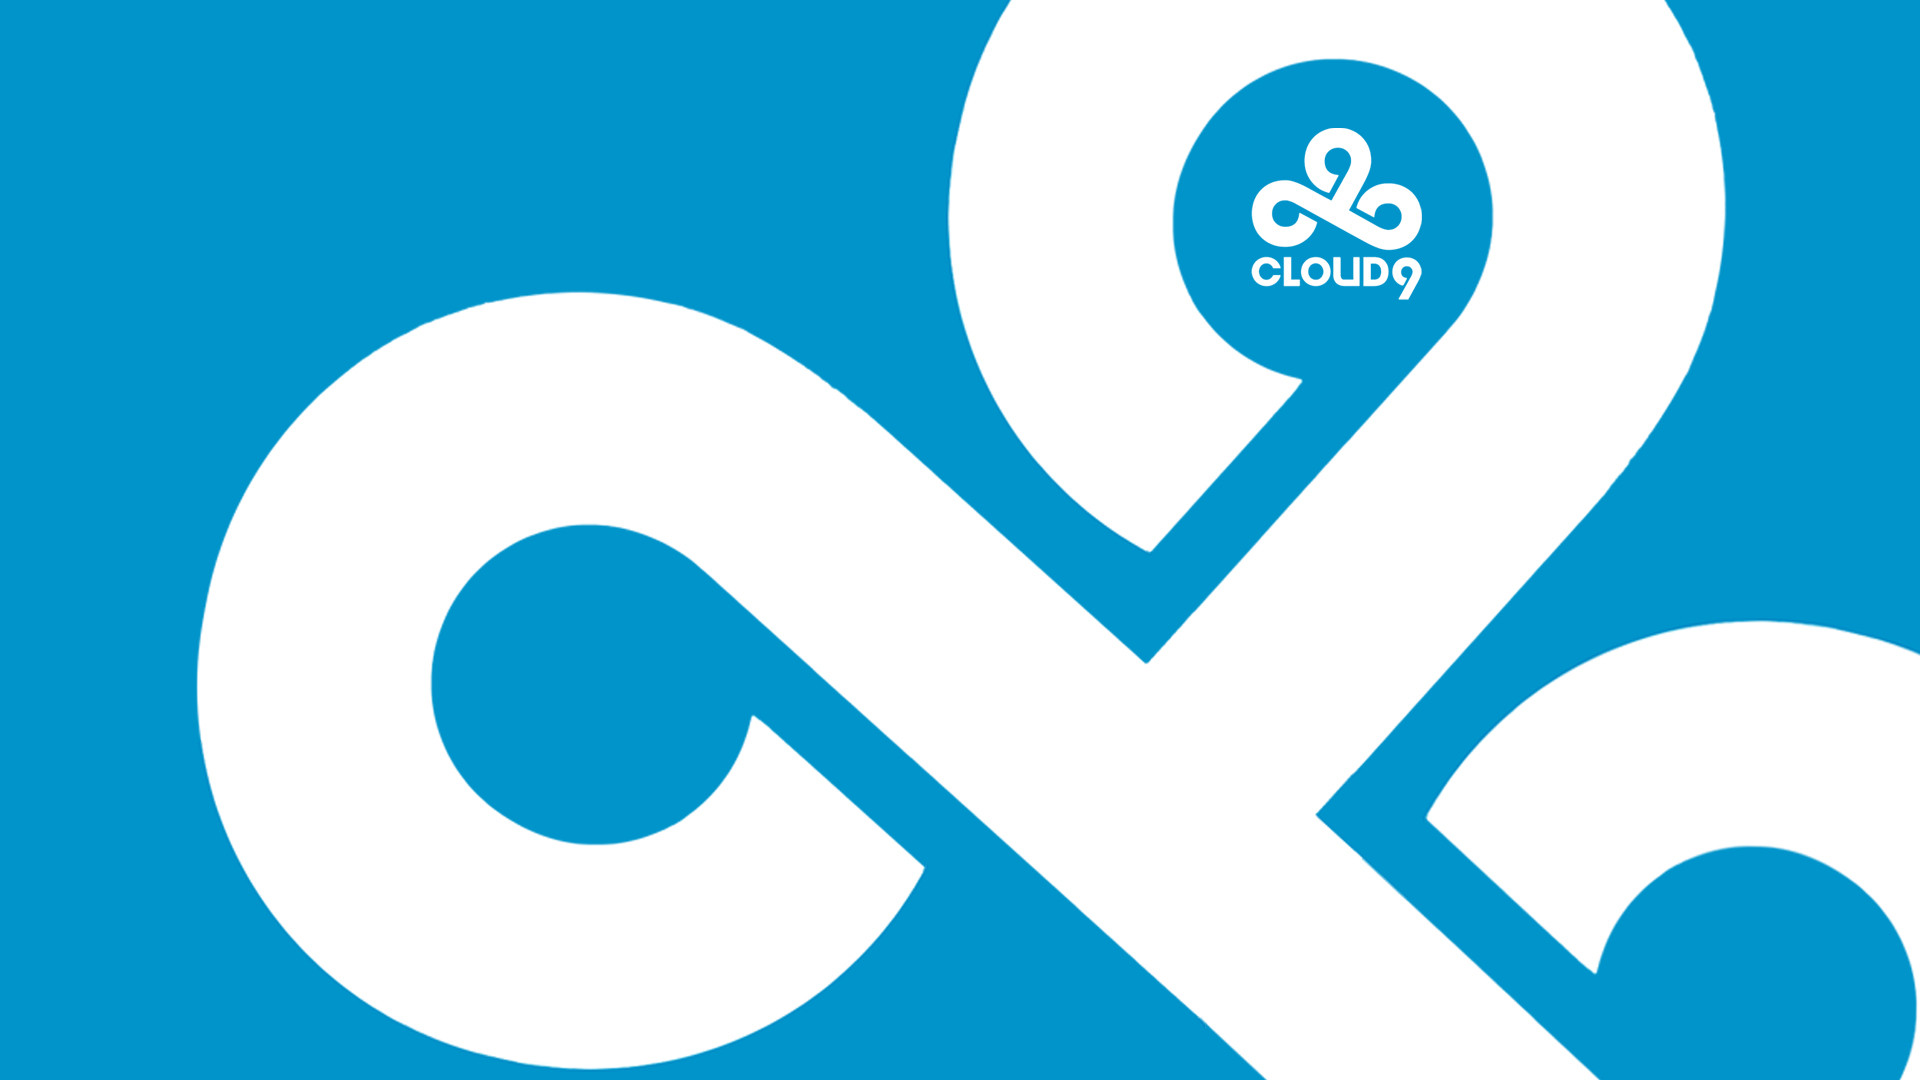 Simple Cloud9 Wallpaper based on the new jersey.